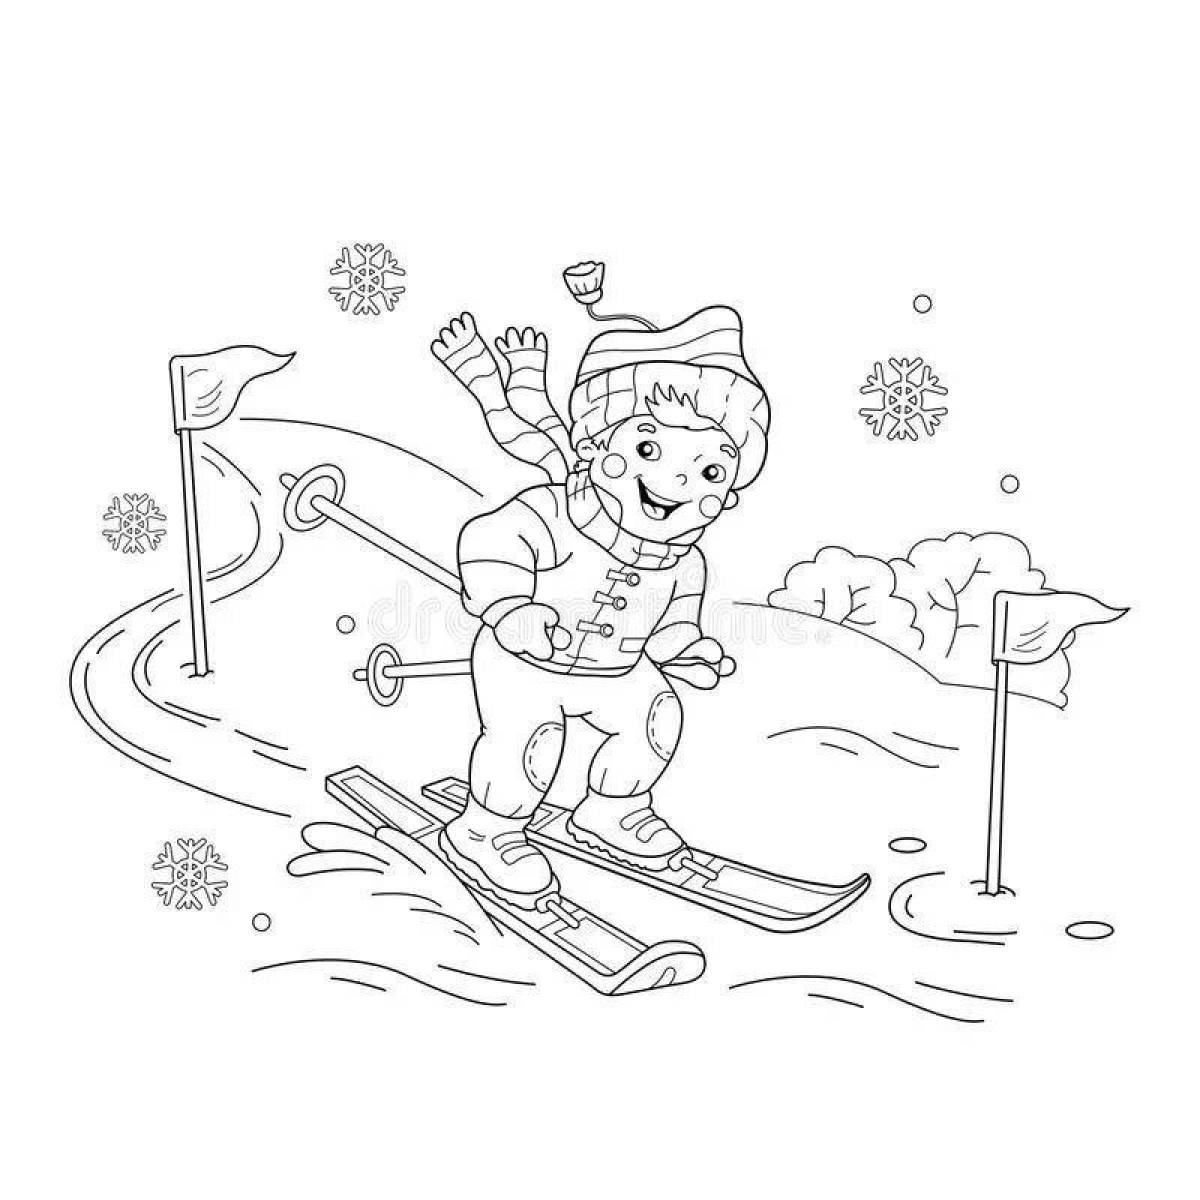 Fun winter sports coloring page